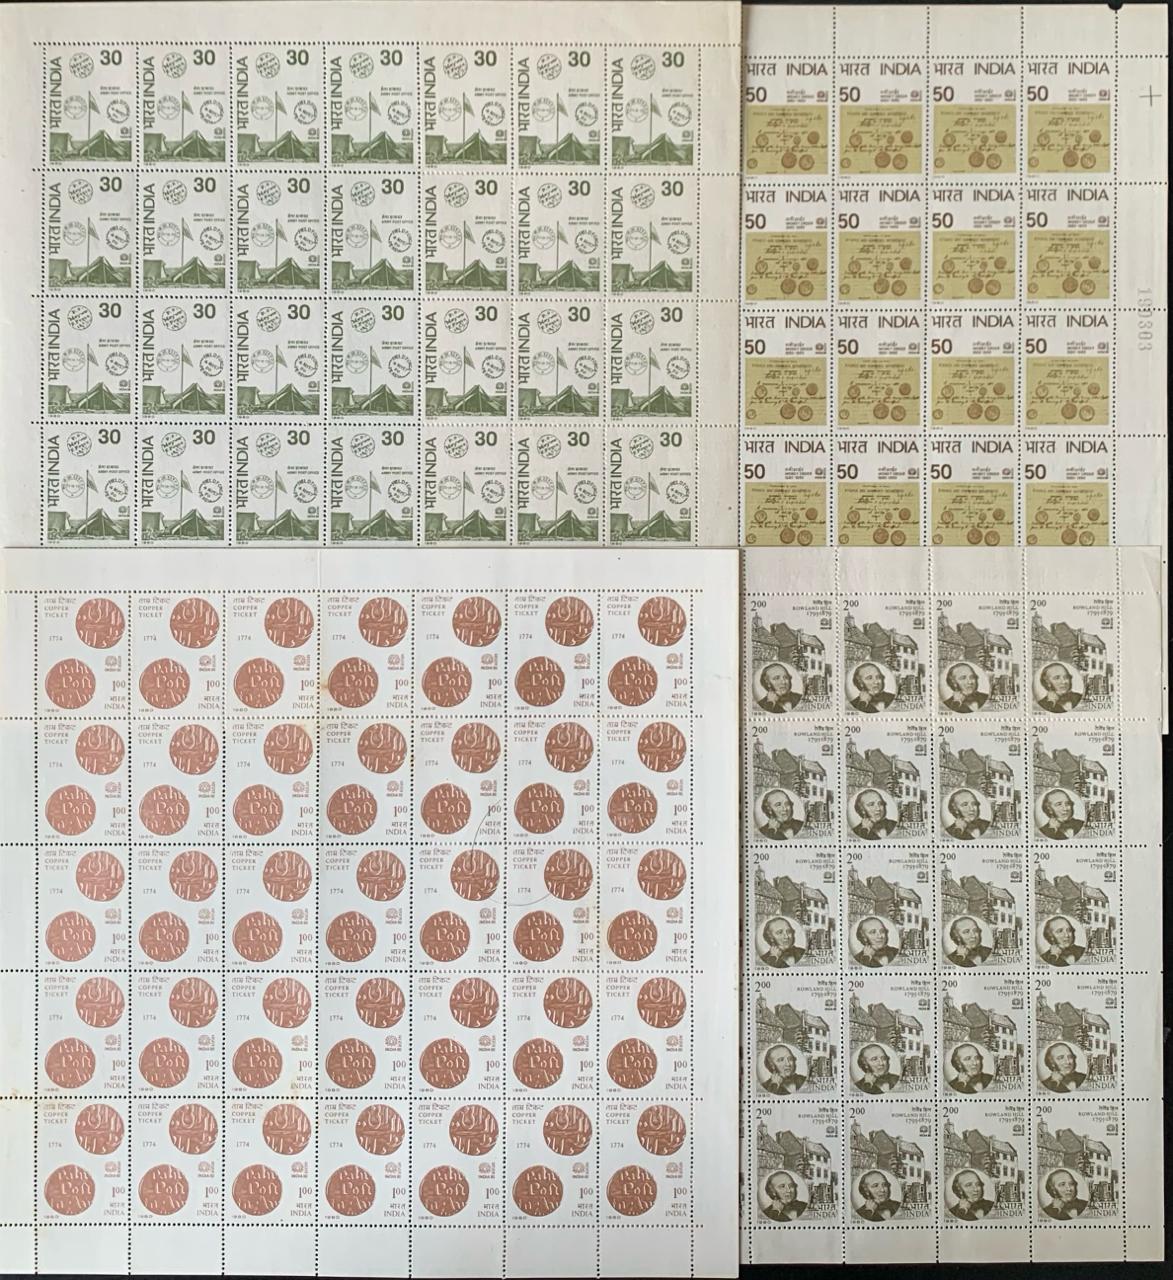 India 1980 International Stamp Exhibition, New Delhi Complete Set in Full Sheets